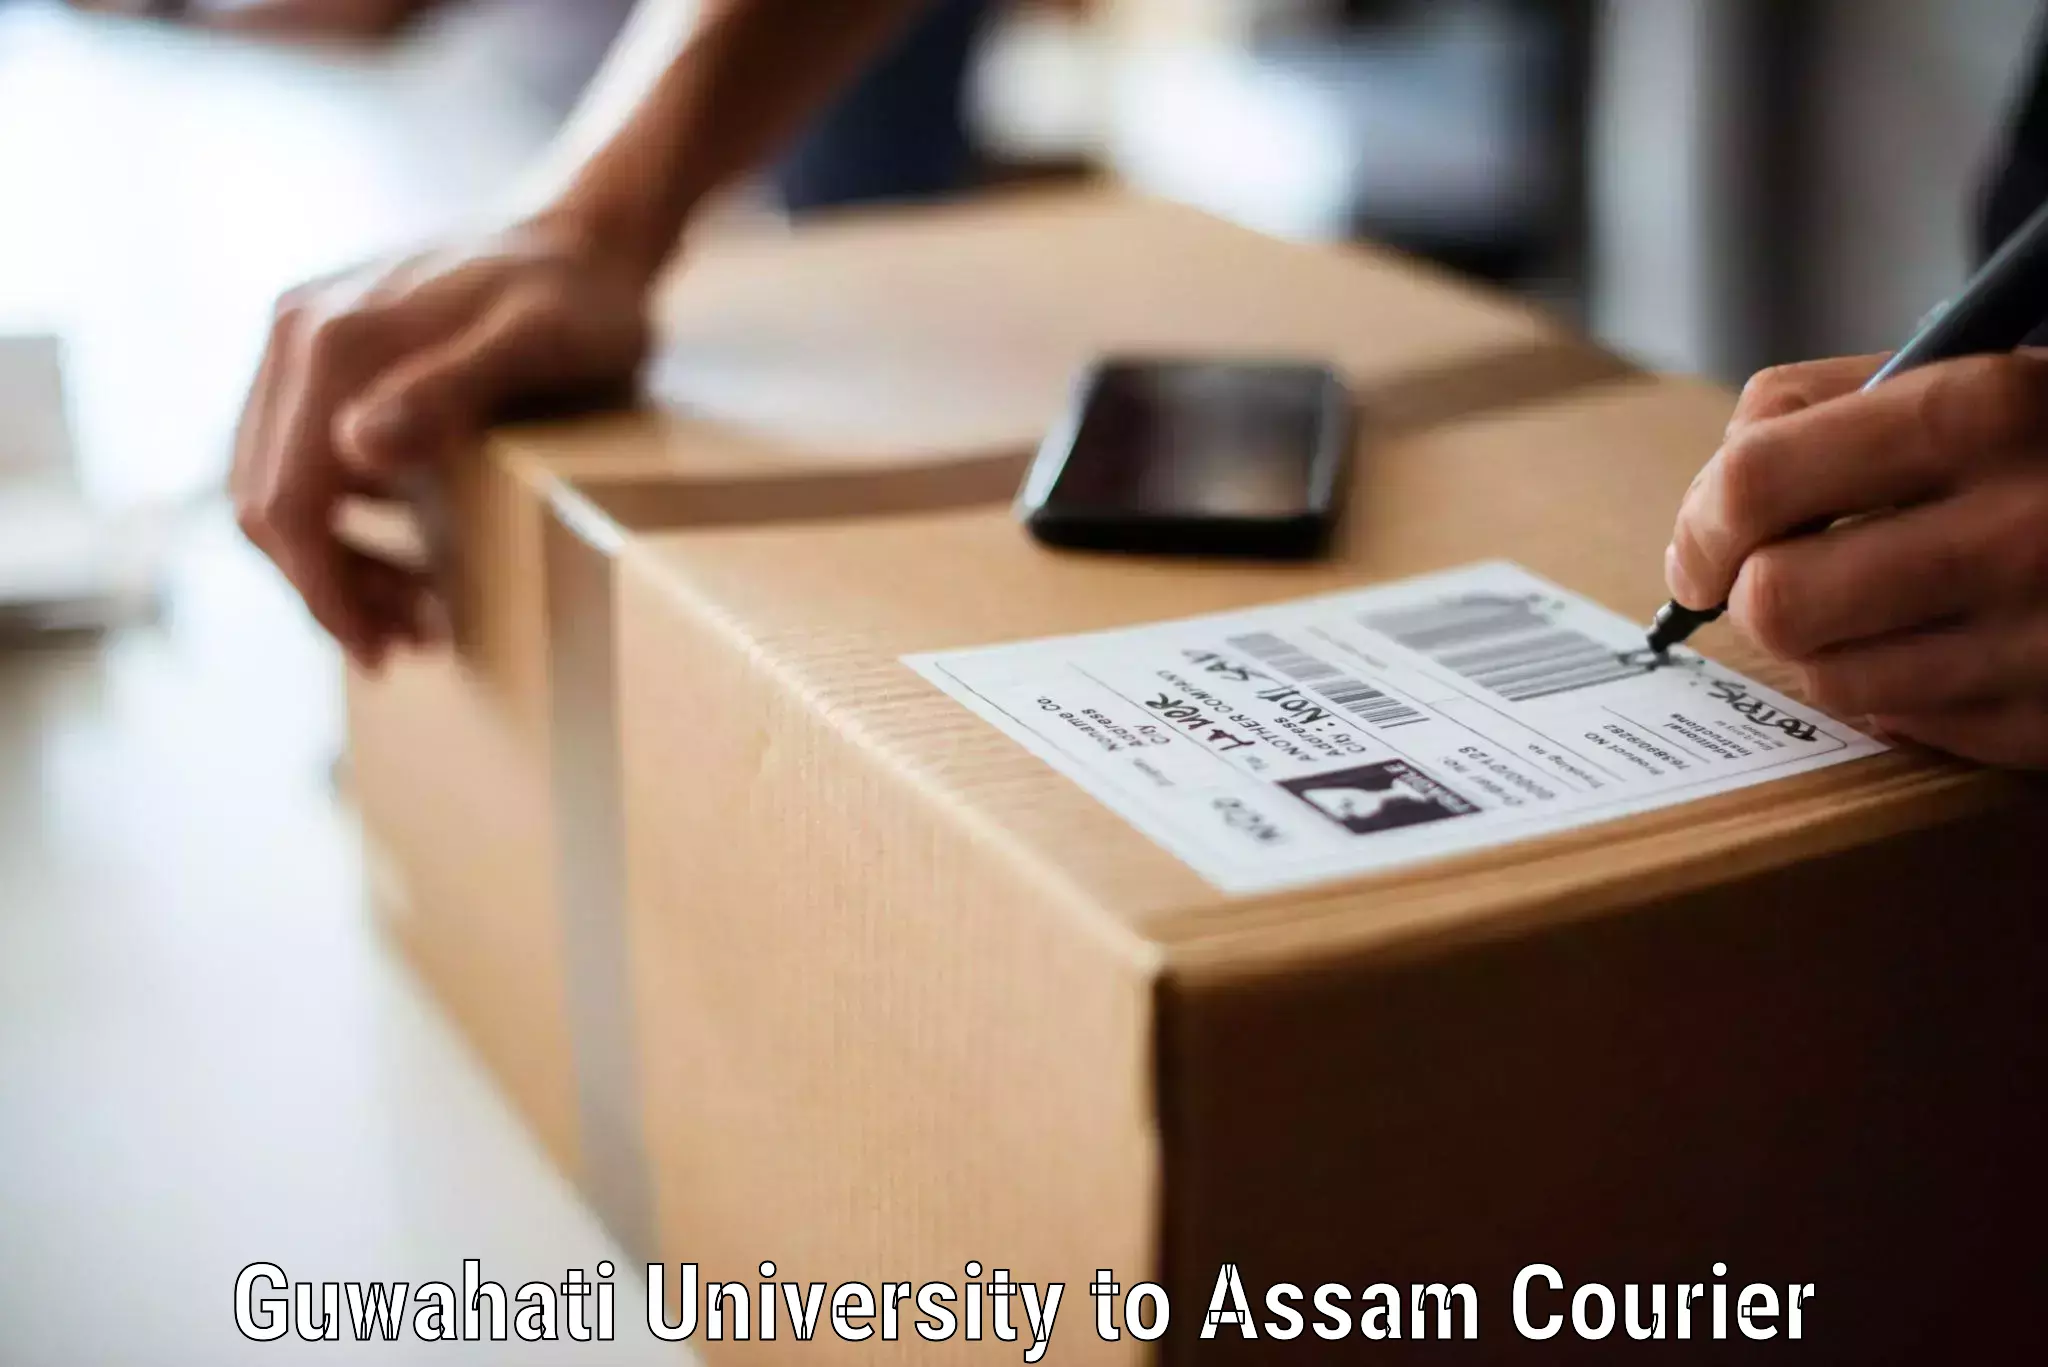 Packing and moving services in Guwahati University to Narayanpur Lakhimpur